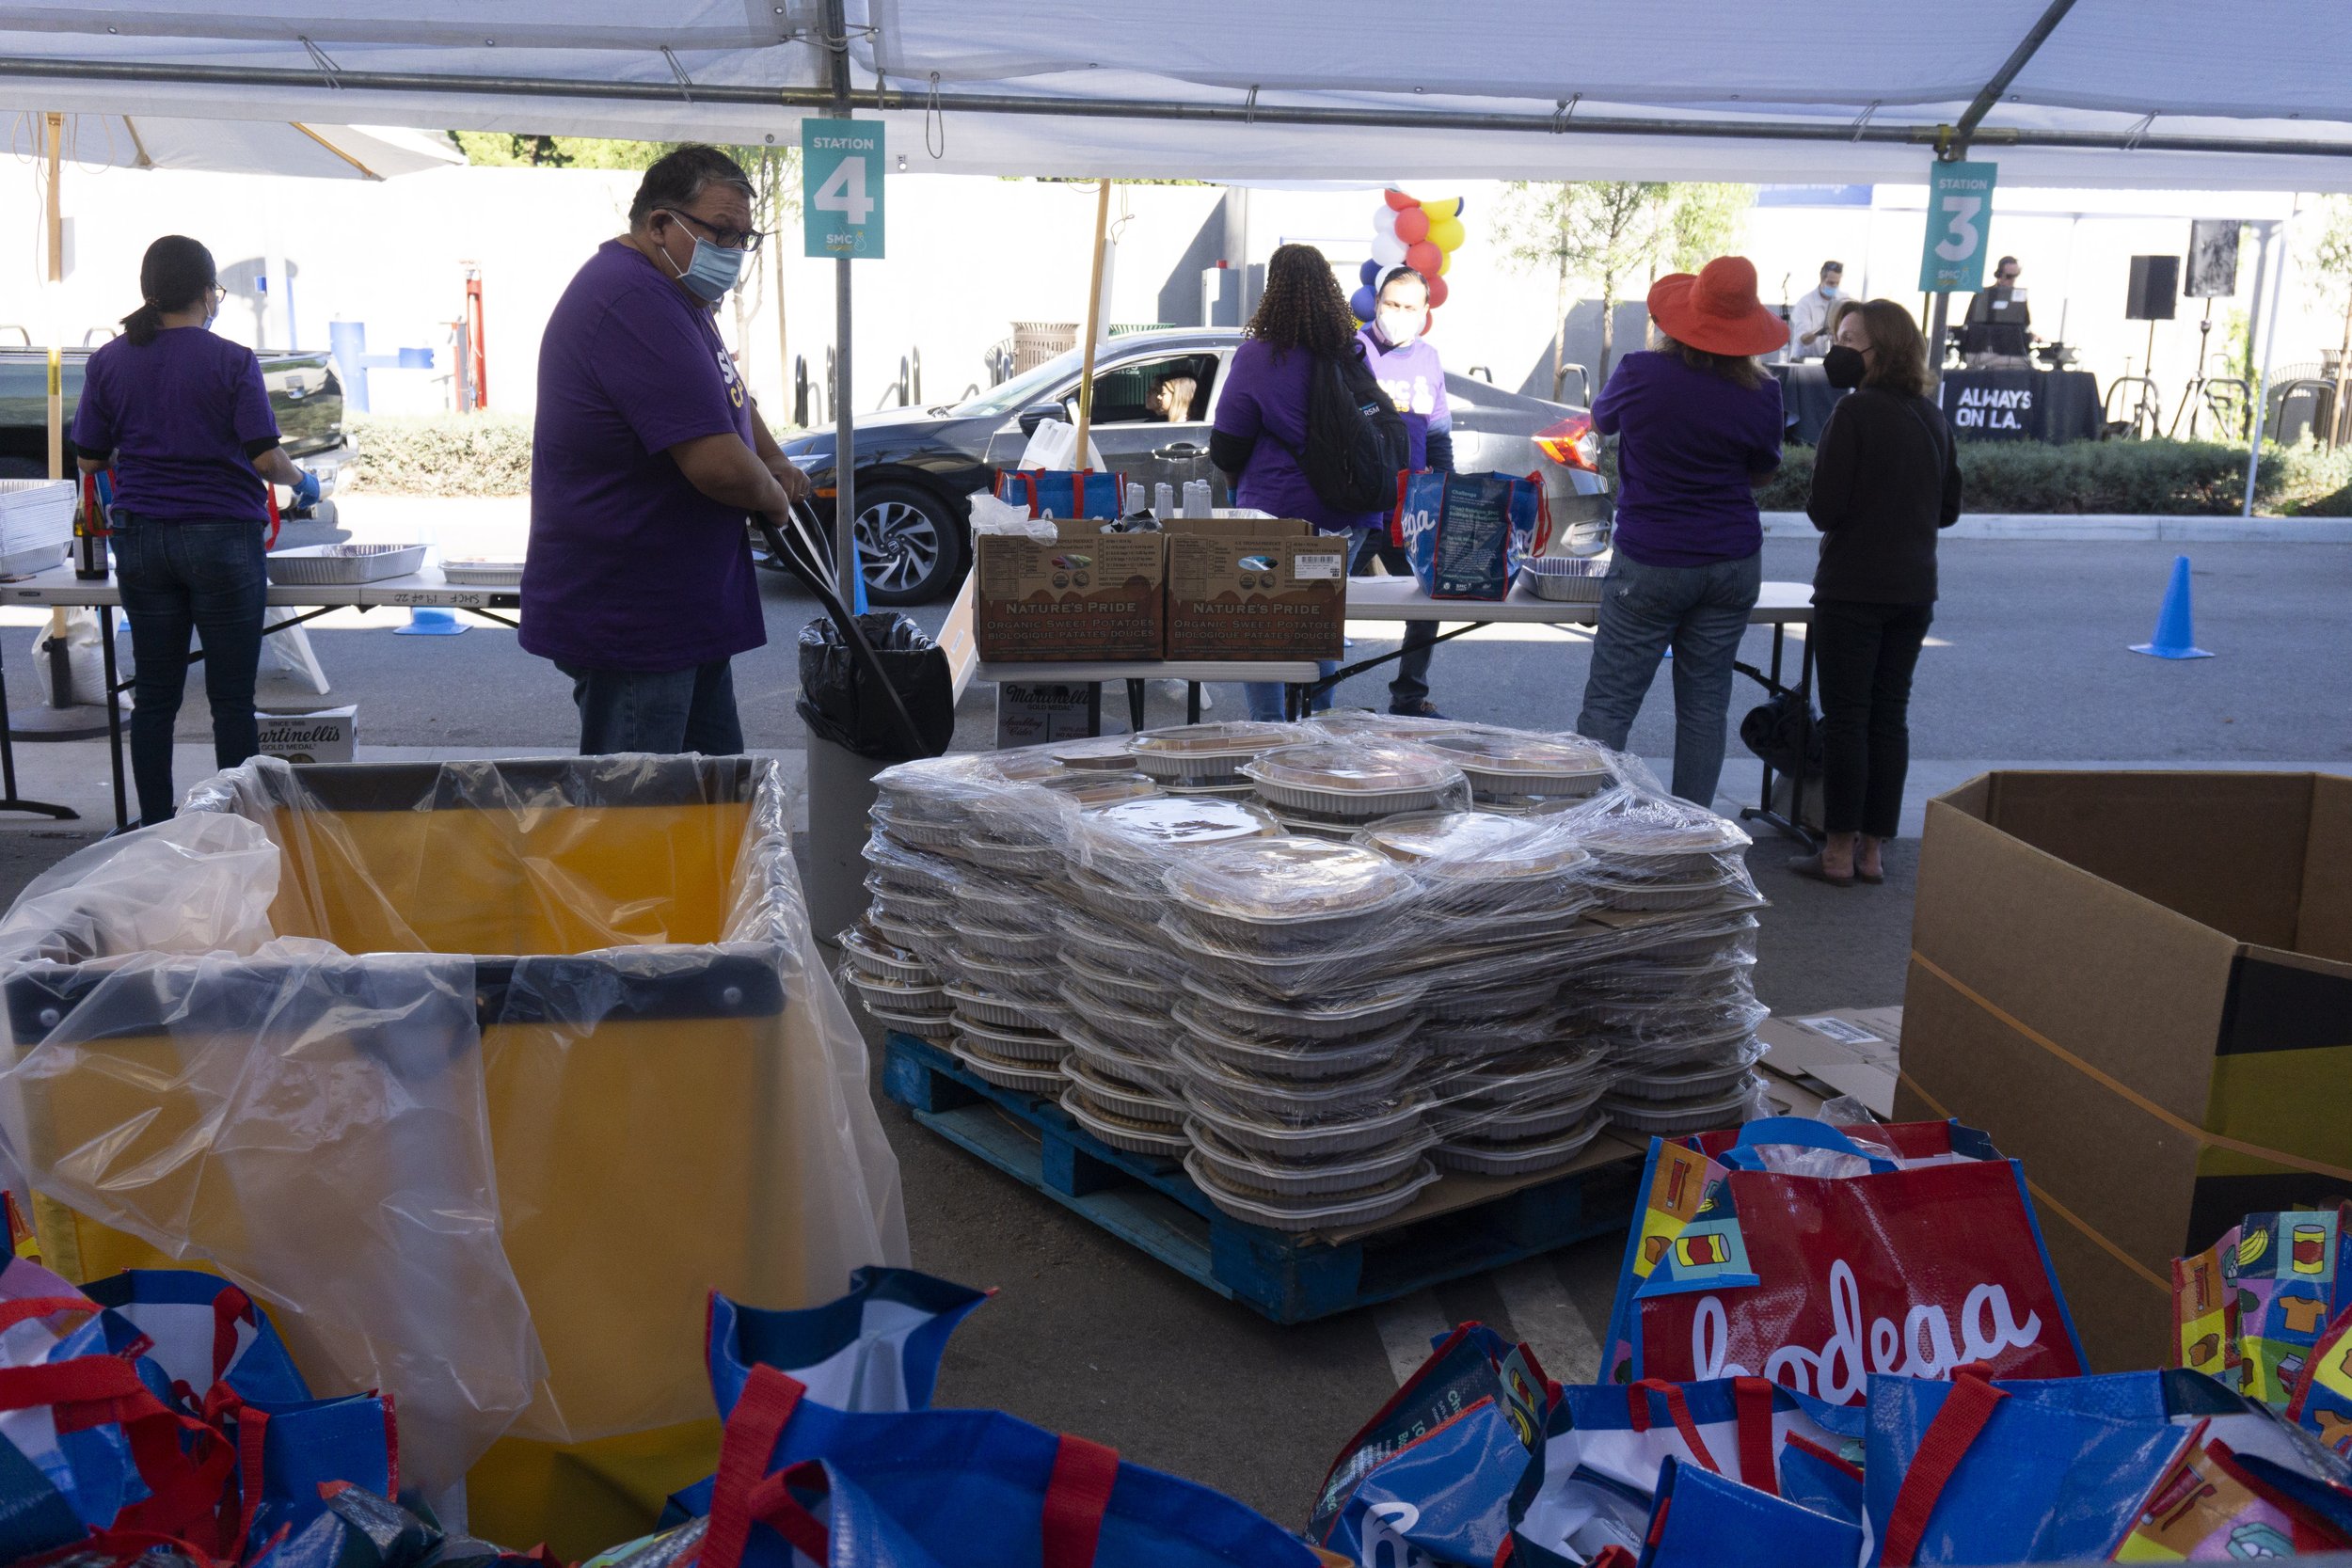  Volunteers restock pumpkin pies at the "Giving Thanks(giving)" drive through foods distribution at Santa Monica College(SMC) on Tuesday, November 22, 2022, in Santa Monica, Calif. The Bodega program combats food insecurities by providing a Thanksgiv